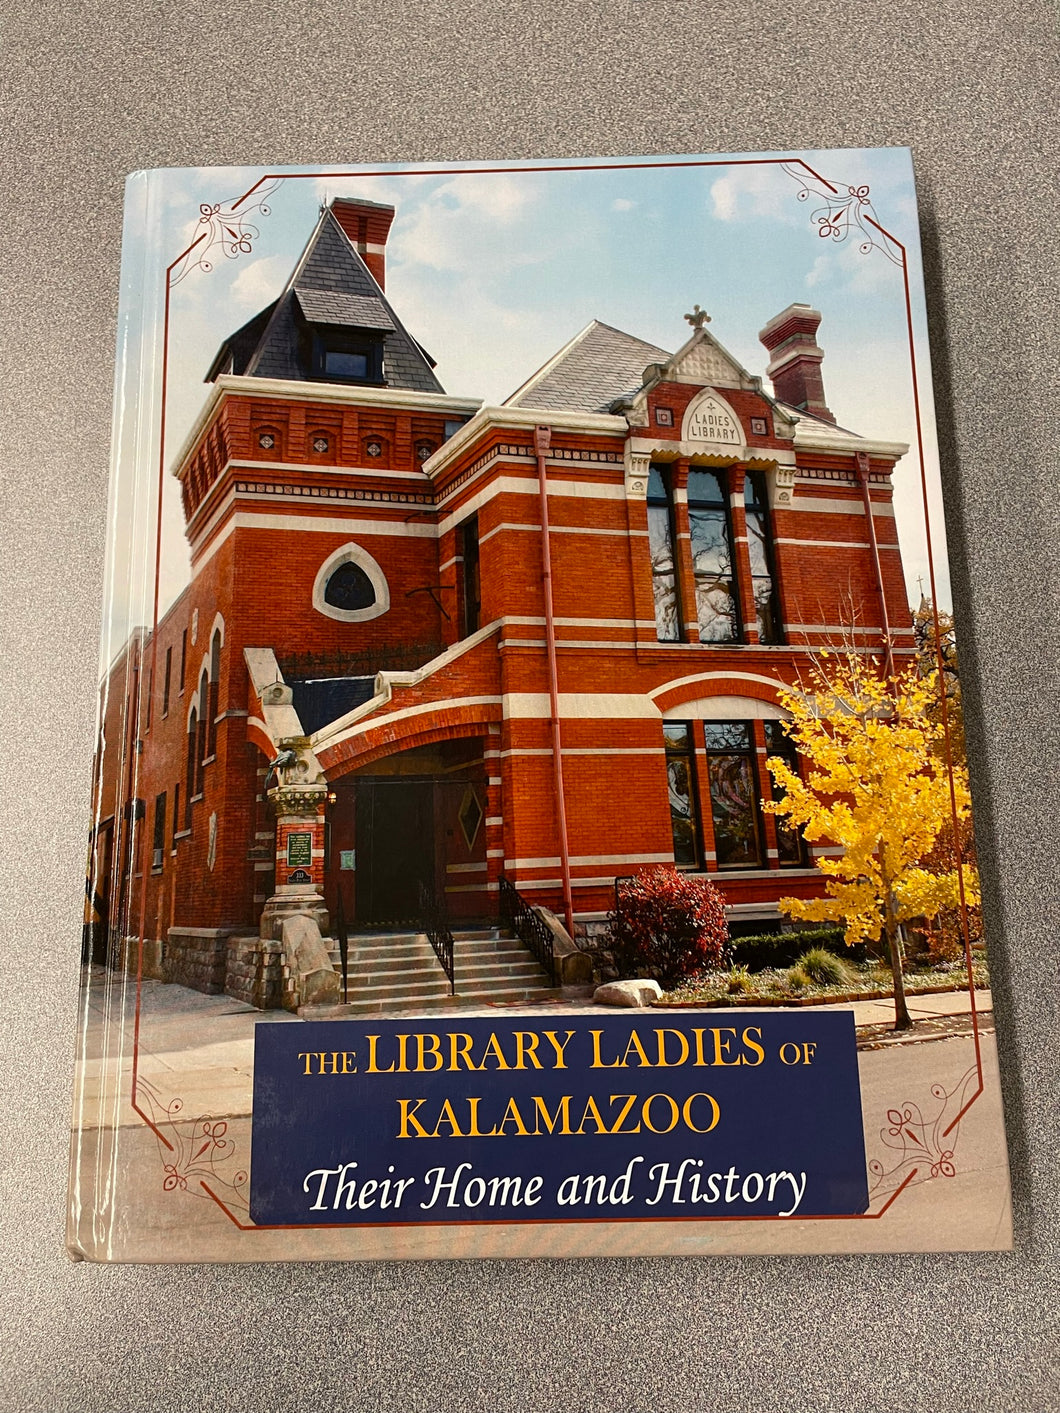 The Library Ladies of Kalamazoo: Their Home and History, [2016] MI 1/23